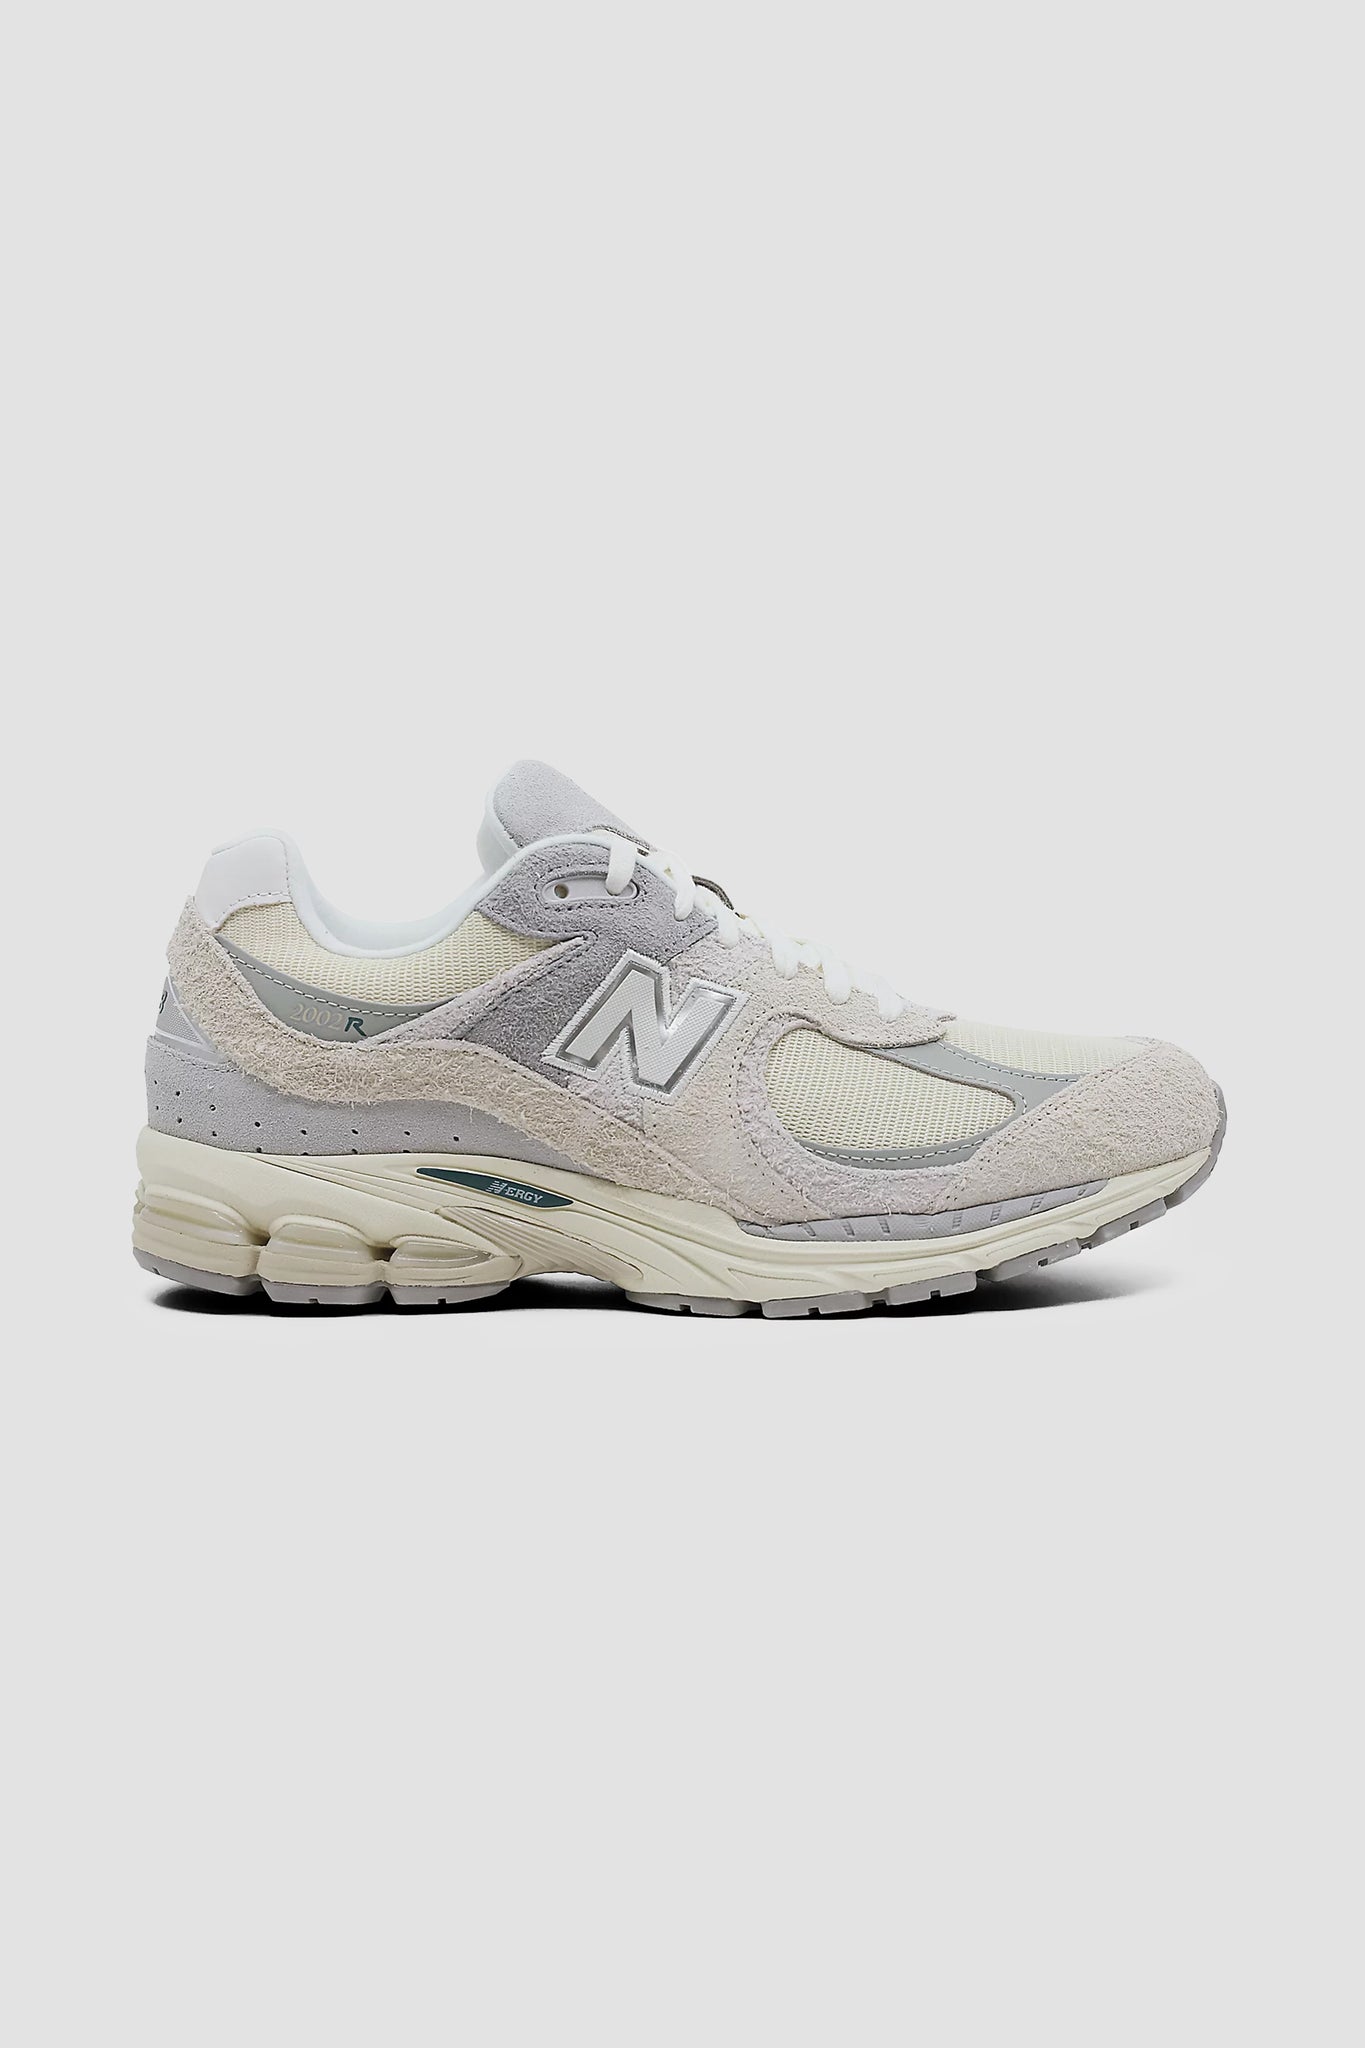 New Balance Unisex 2002R Sneaker in Linen with concrete and slate grey